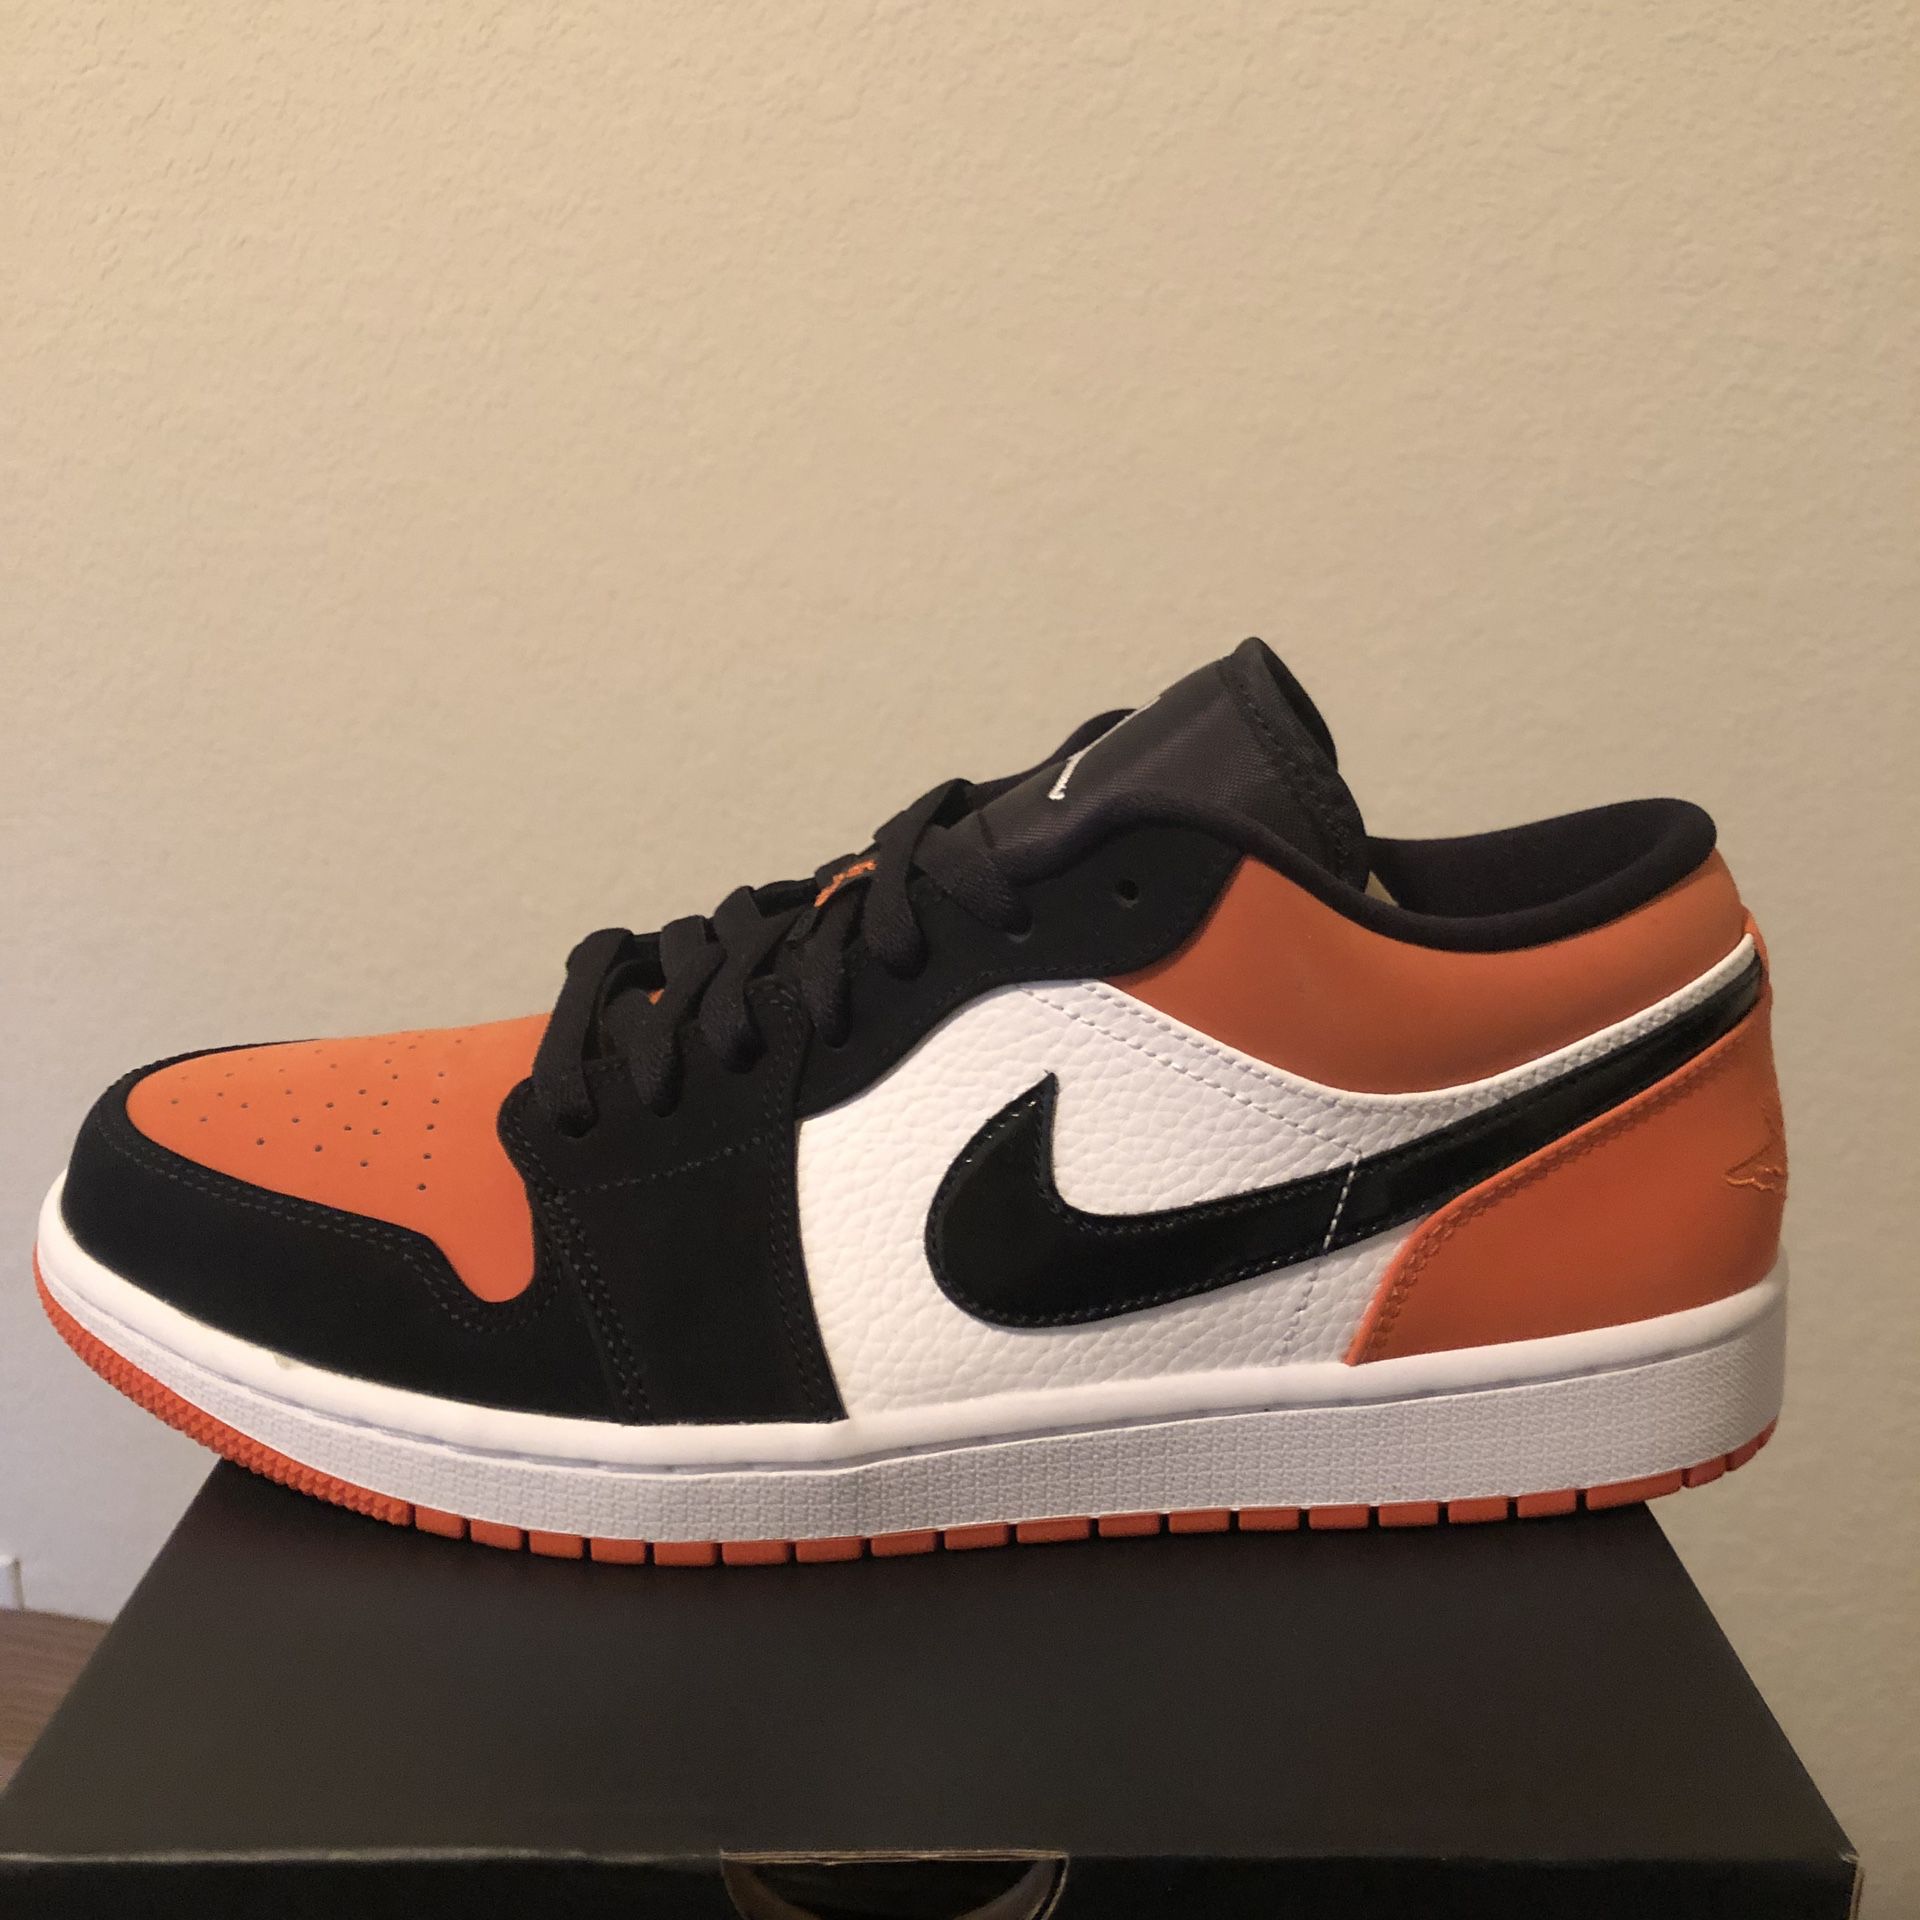 Air Jordan 1 low “Shattered Backboard” sizes 10.5, 11, 12 and 15